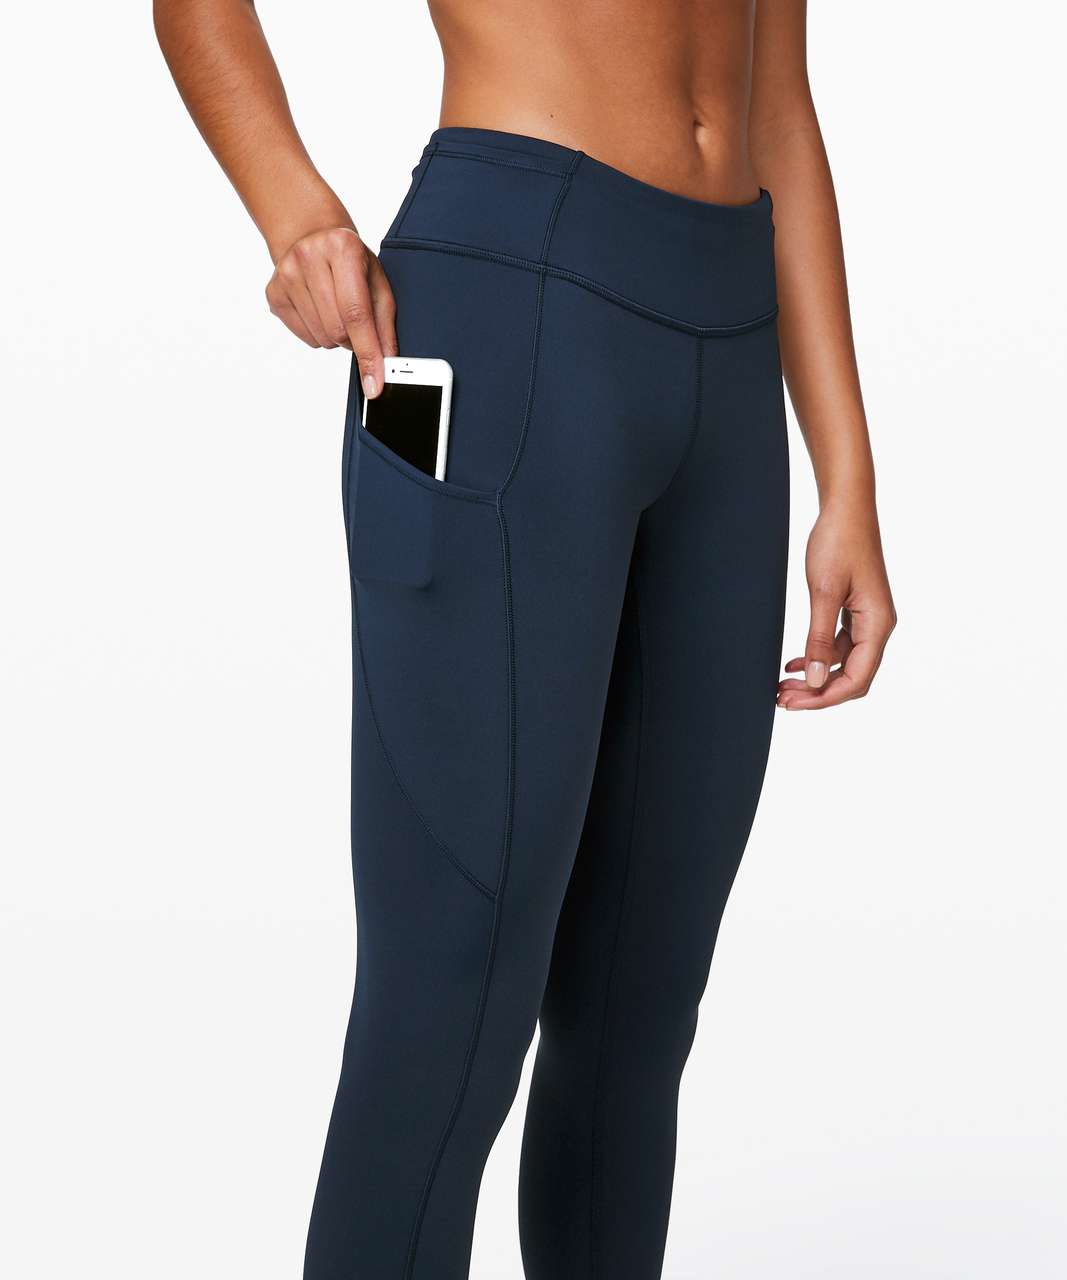 Lululemon Fast and Free Mid-Rise Tight 28 *Non-Reflective - True